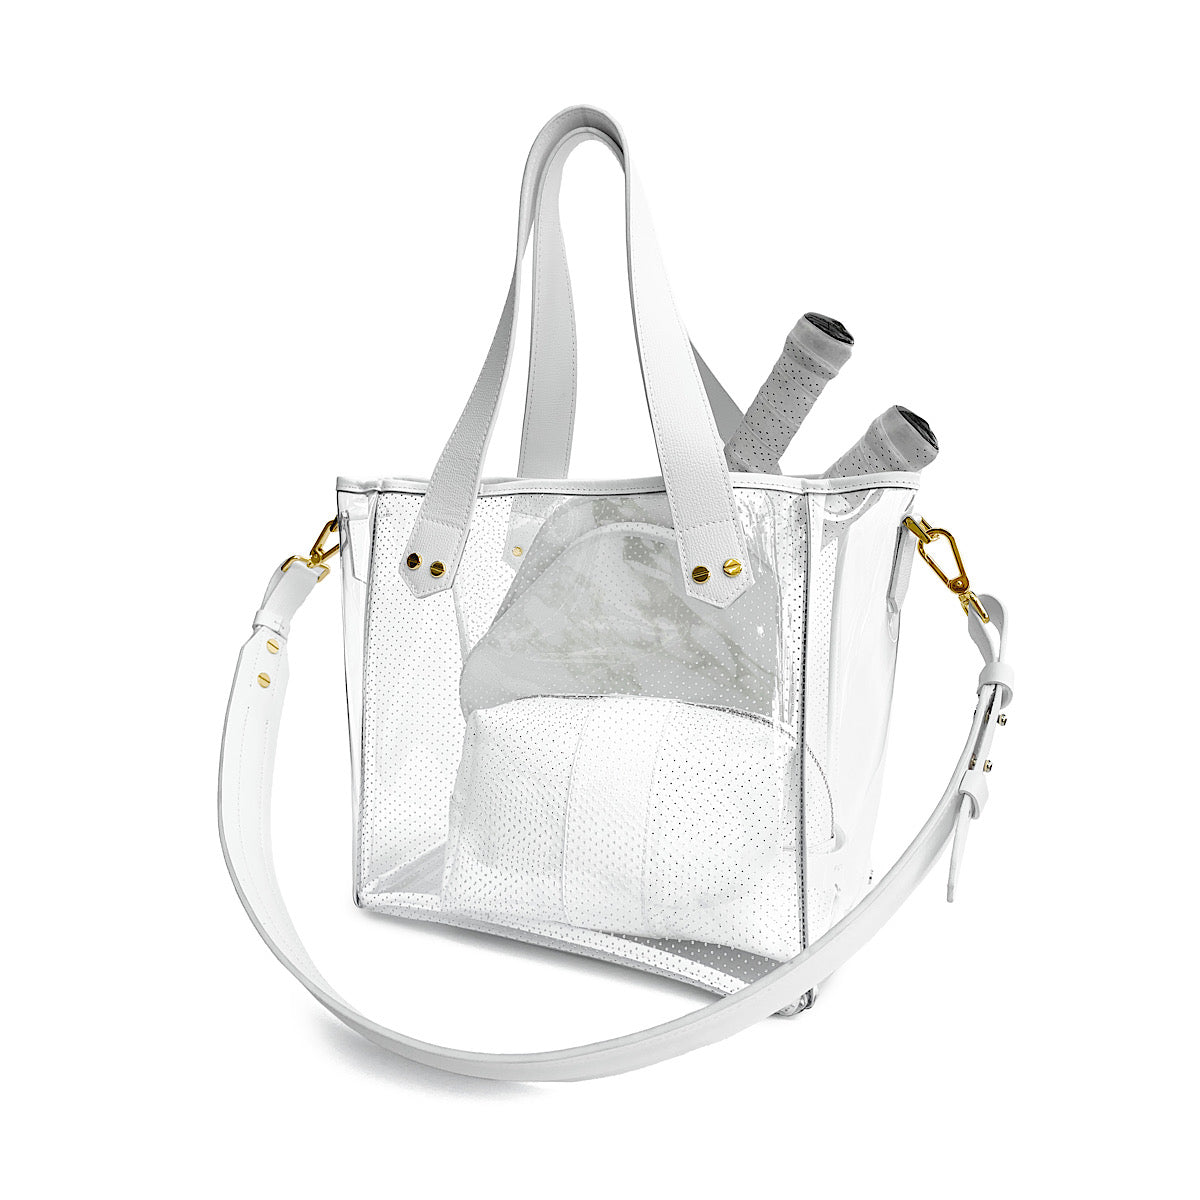 Gameday Bag - White Leather / Clear PVC